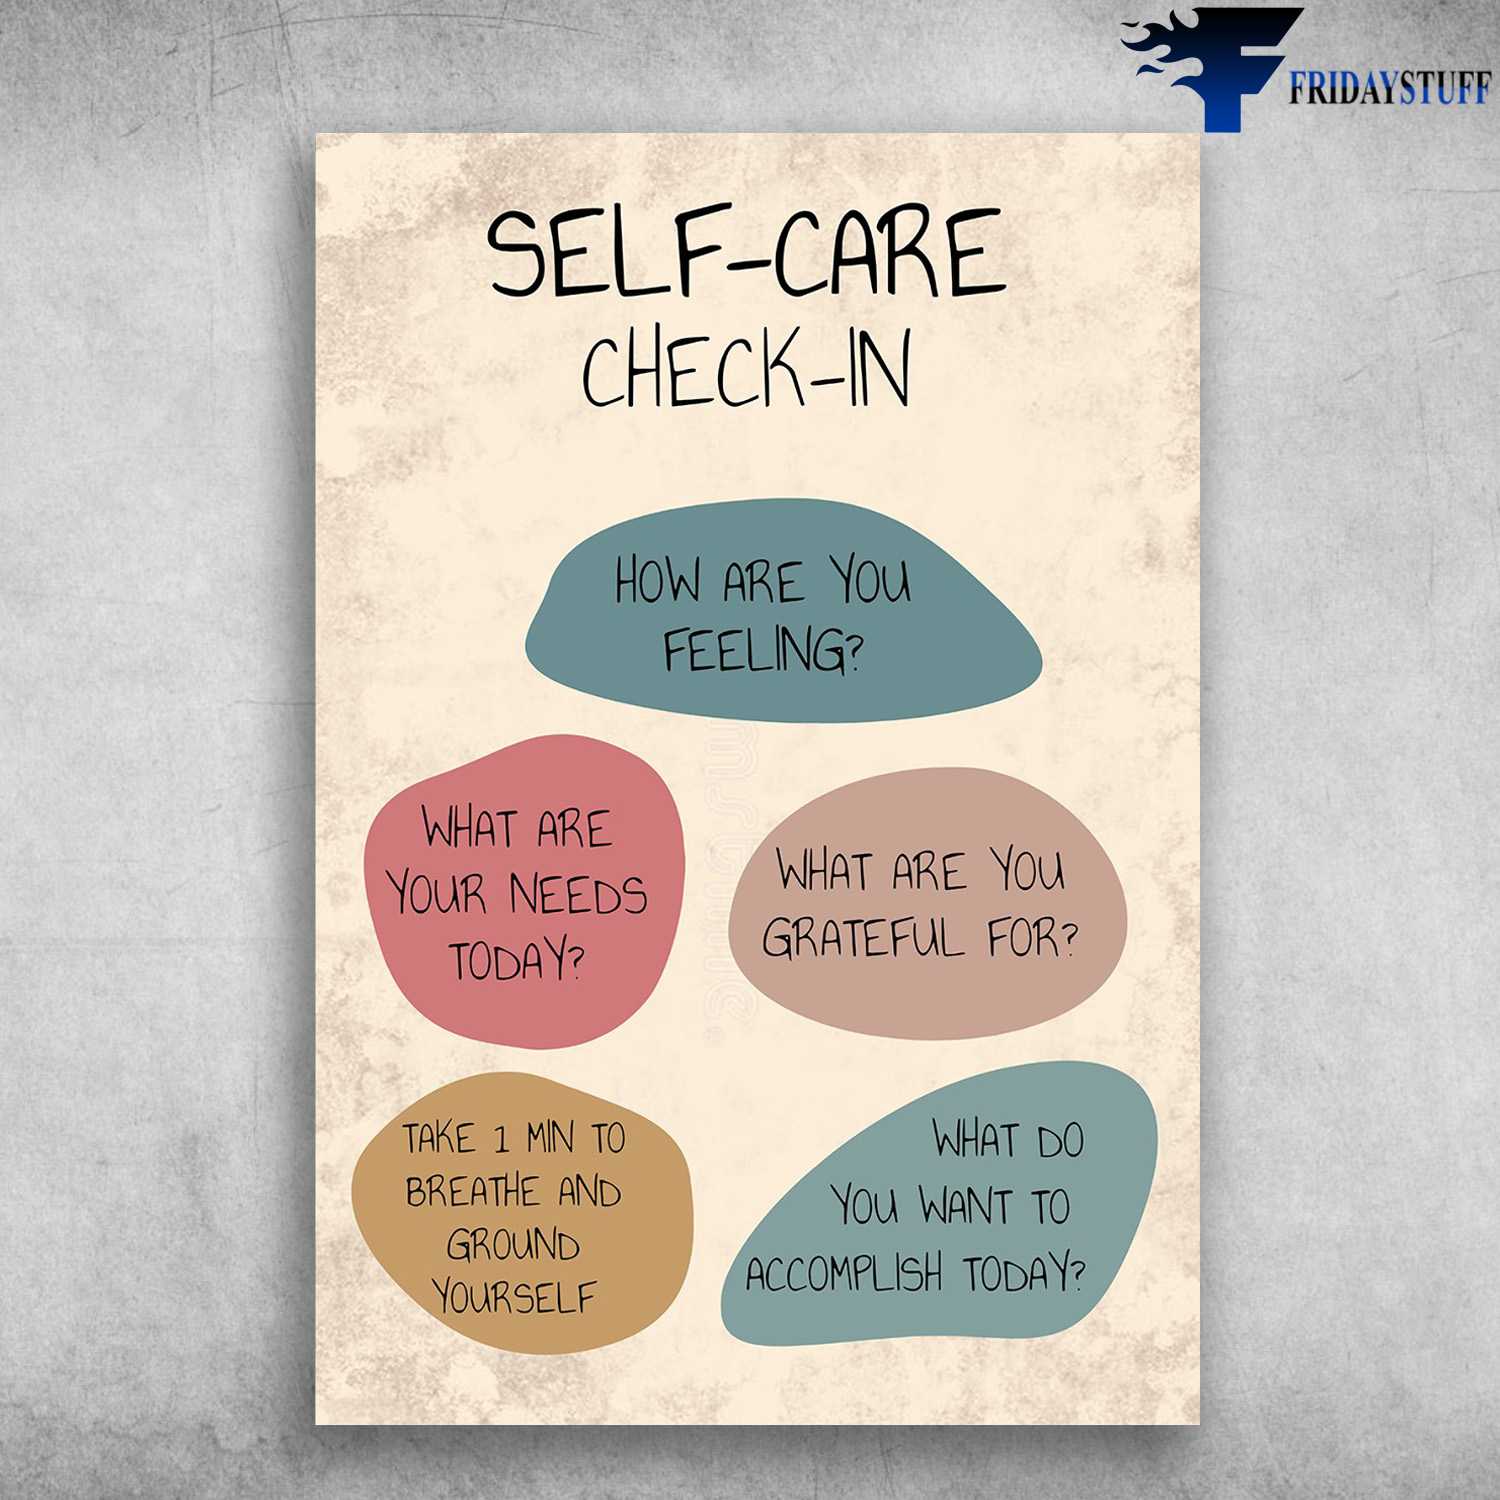 Self-Care Check-In - How Are You Feeling, What Are Your Needs Today, What Are You Grateful For, Take 1 Min To Breathe And Ground Yourself, What Do You Want To Accomplish Today